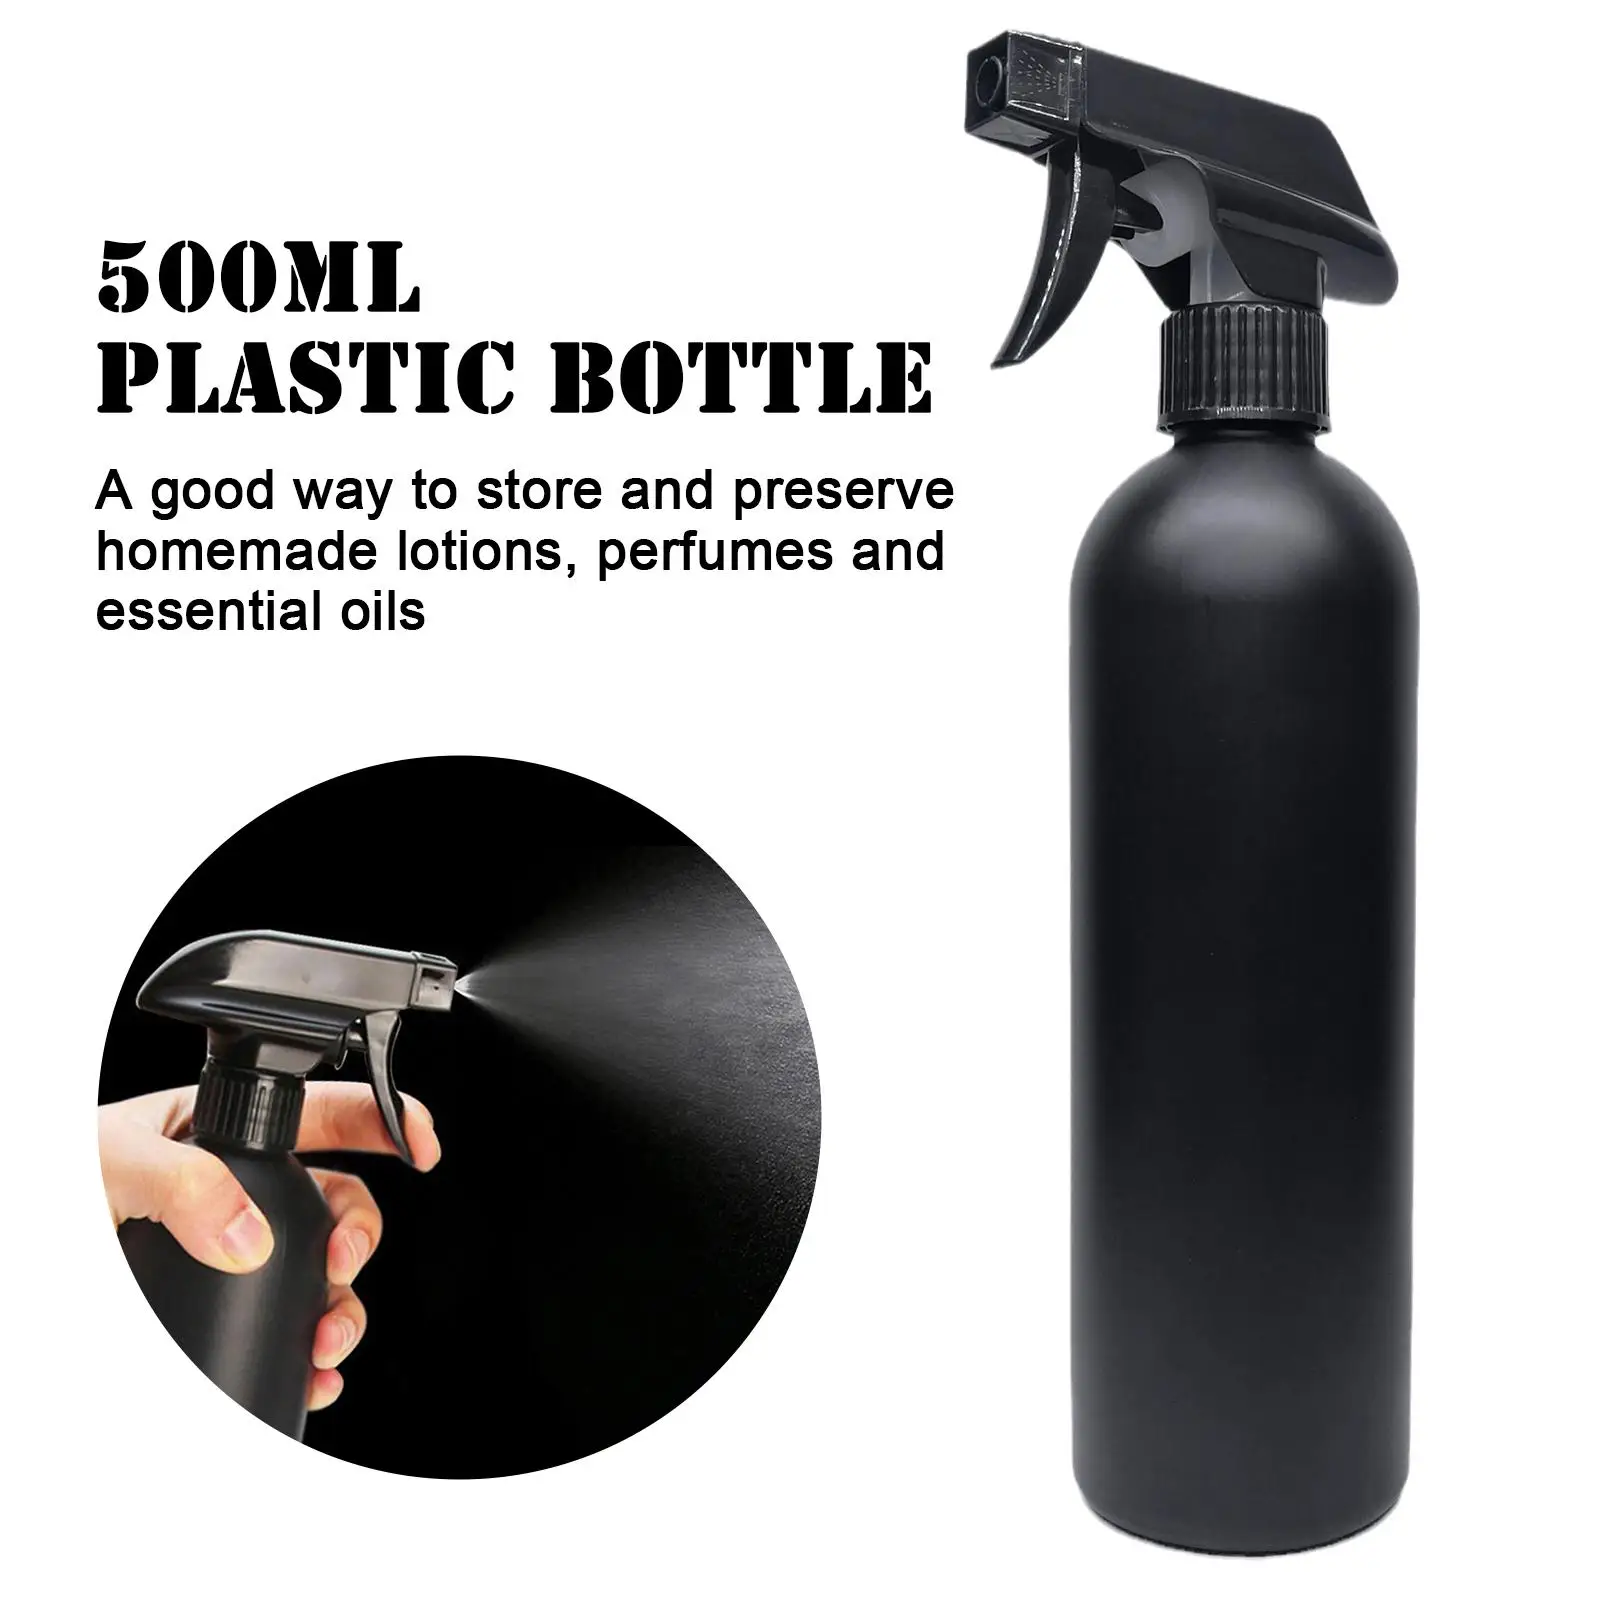 500ML Plastic Refillable Bottle Spray Bottles Empty Skin Care Refillable Perfume Dispensing Aromatherapy Tool Flip-top Cont J3A4 epoxy resin mold diamond heart jewelry casting silicone mould diy crafts plaster soap aromatherapy wax making tool